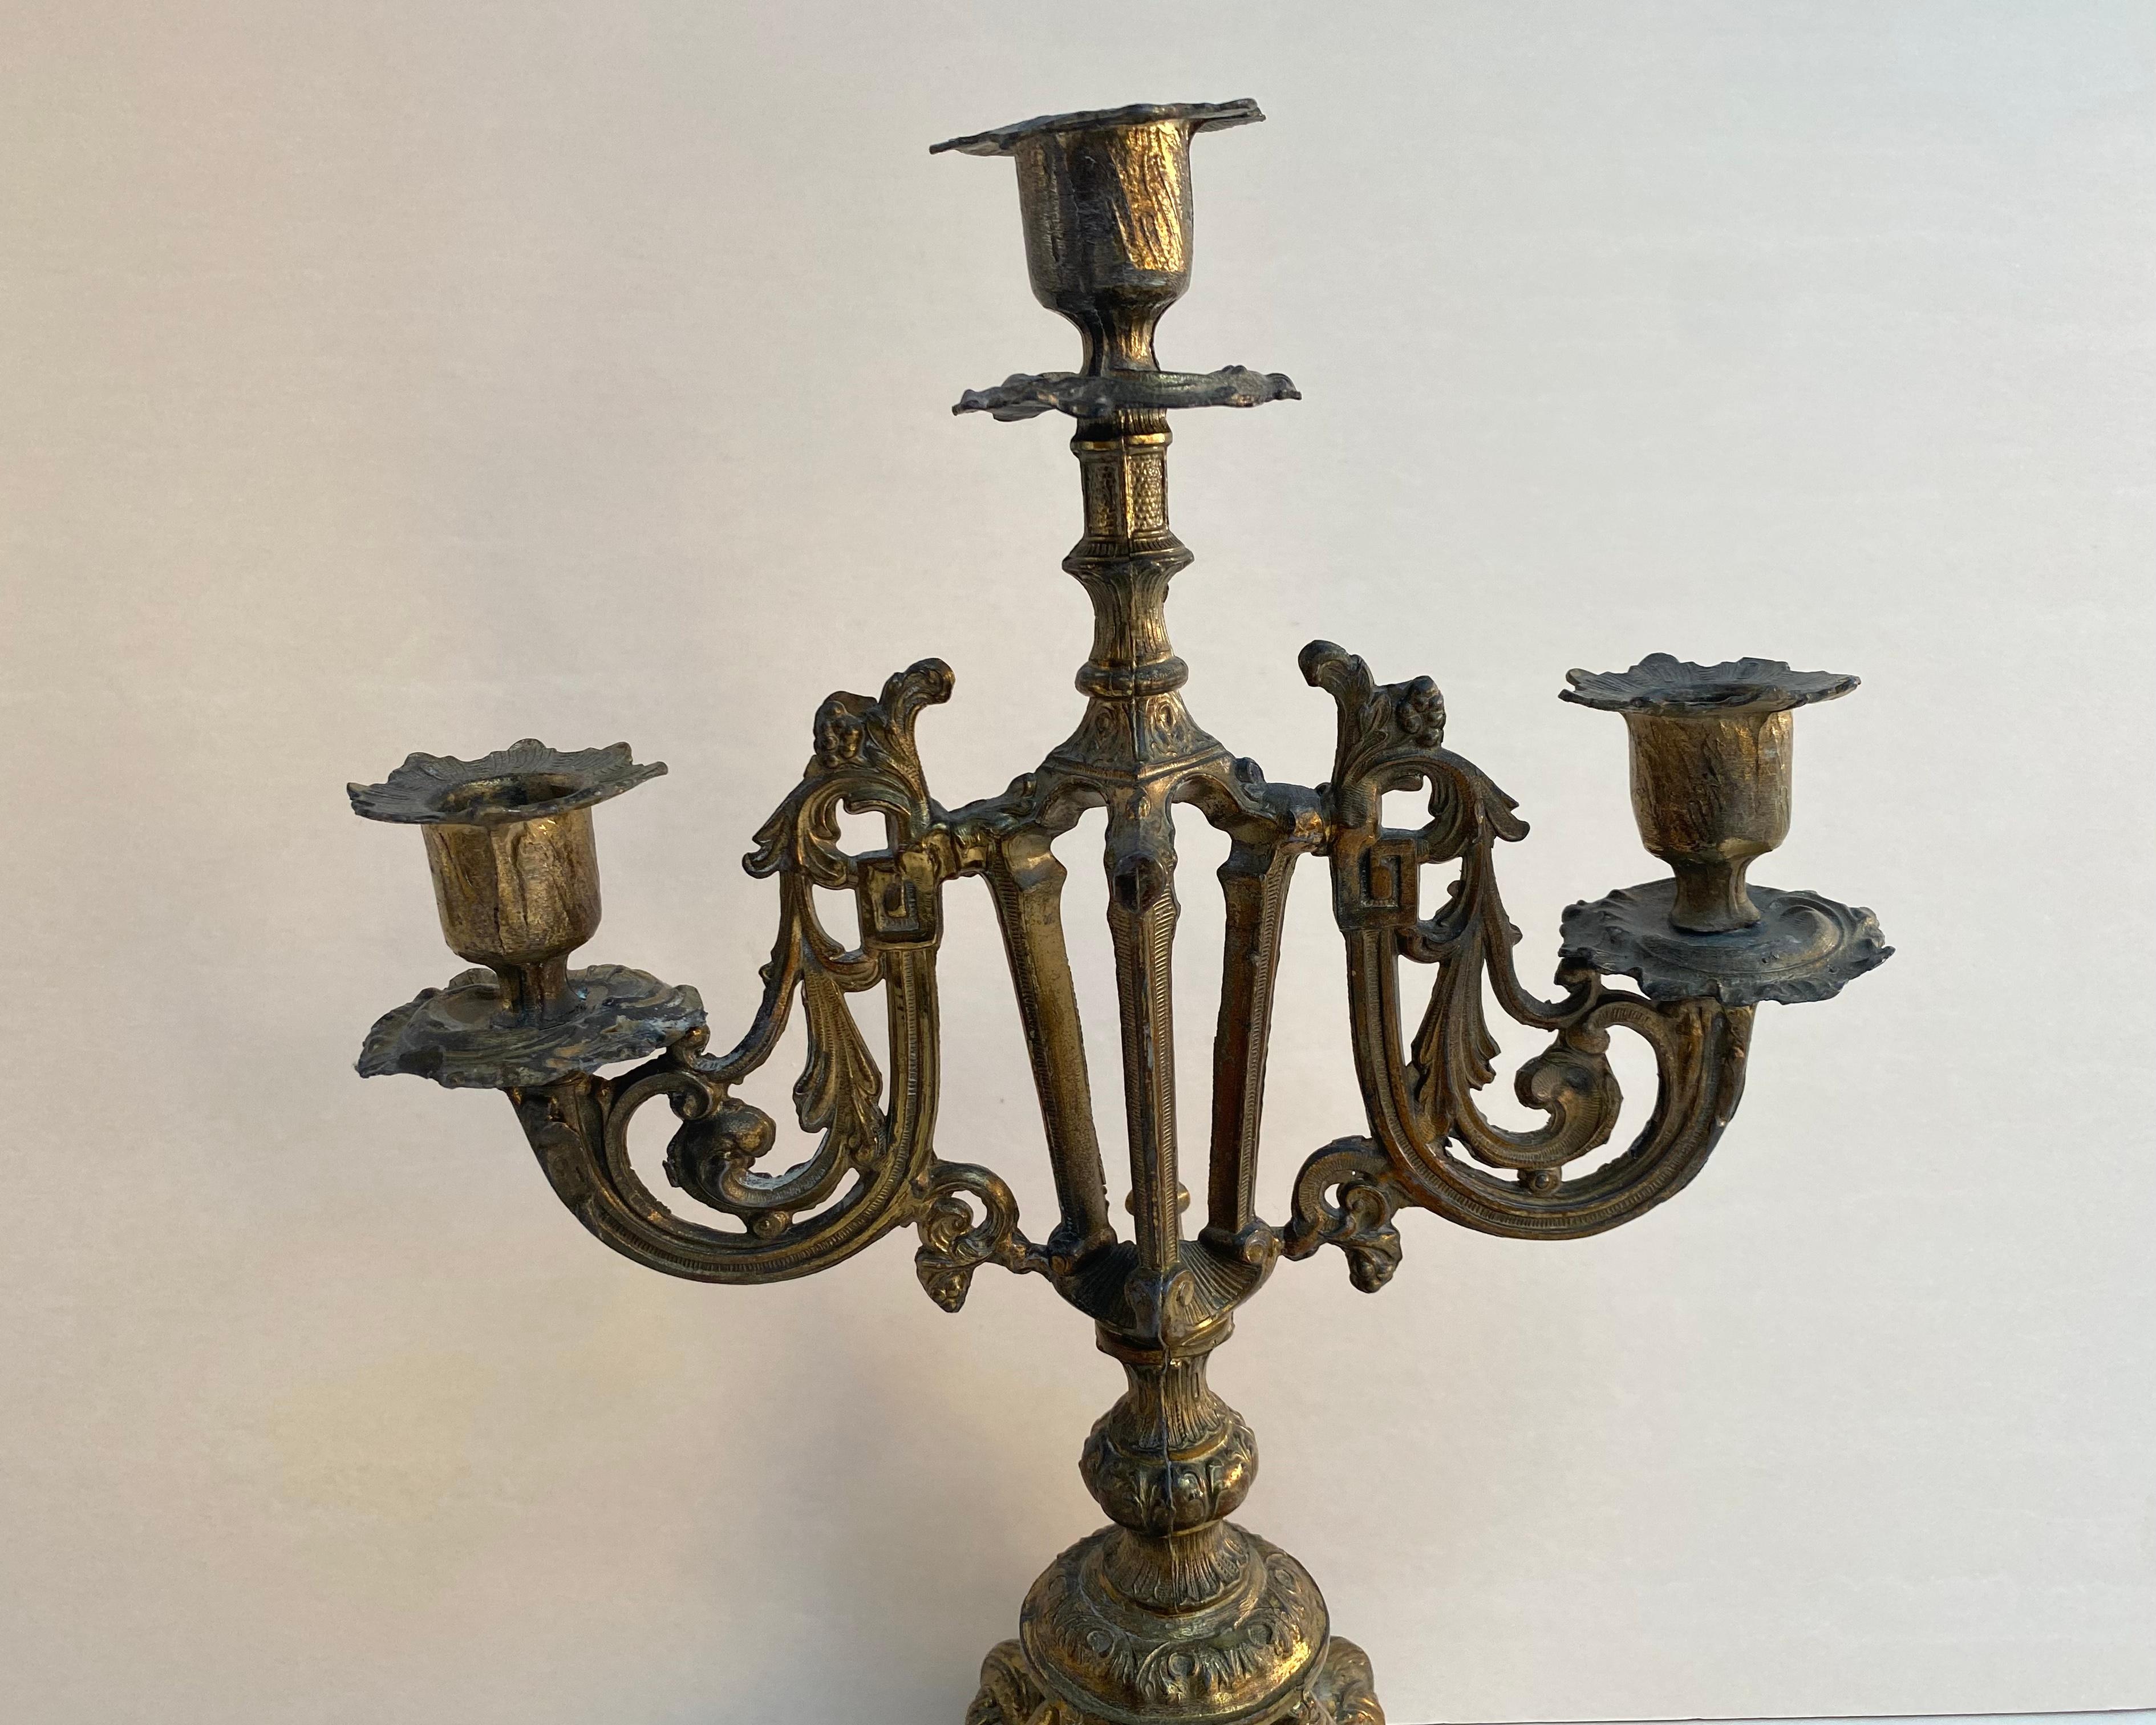 Antique brass candlestick/candelabra with 3 forged arms, Manufactured in France, 1900.

The base is very steady and can hold heavy candles. 

Metal candlesticks or candelabra in the modern world are used partly as home decor rather than for